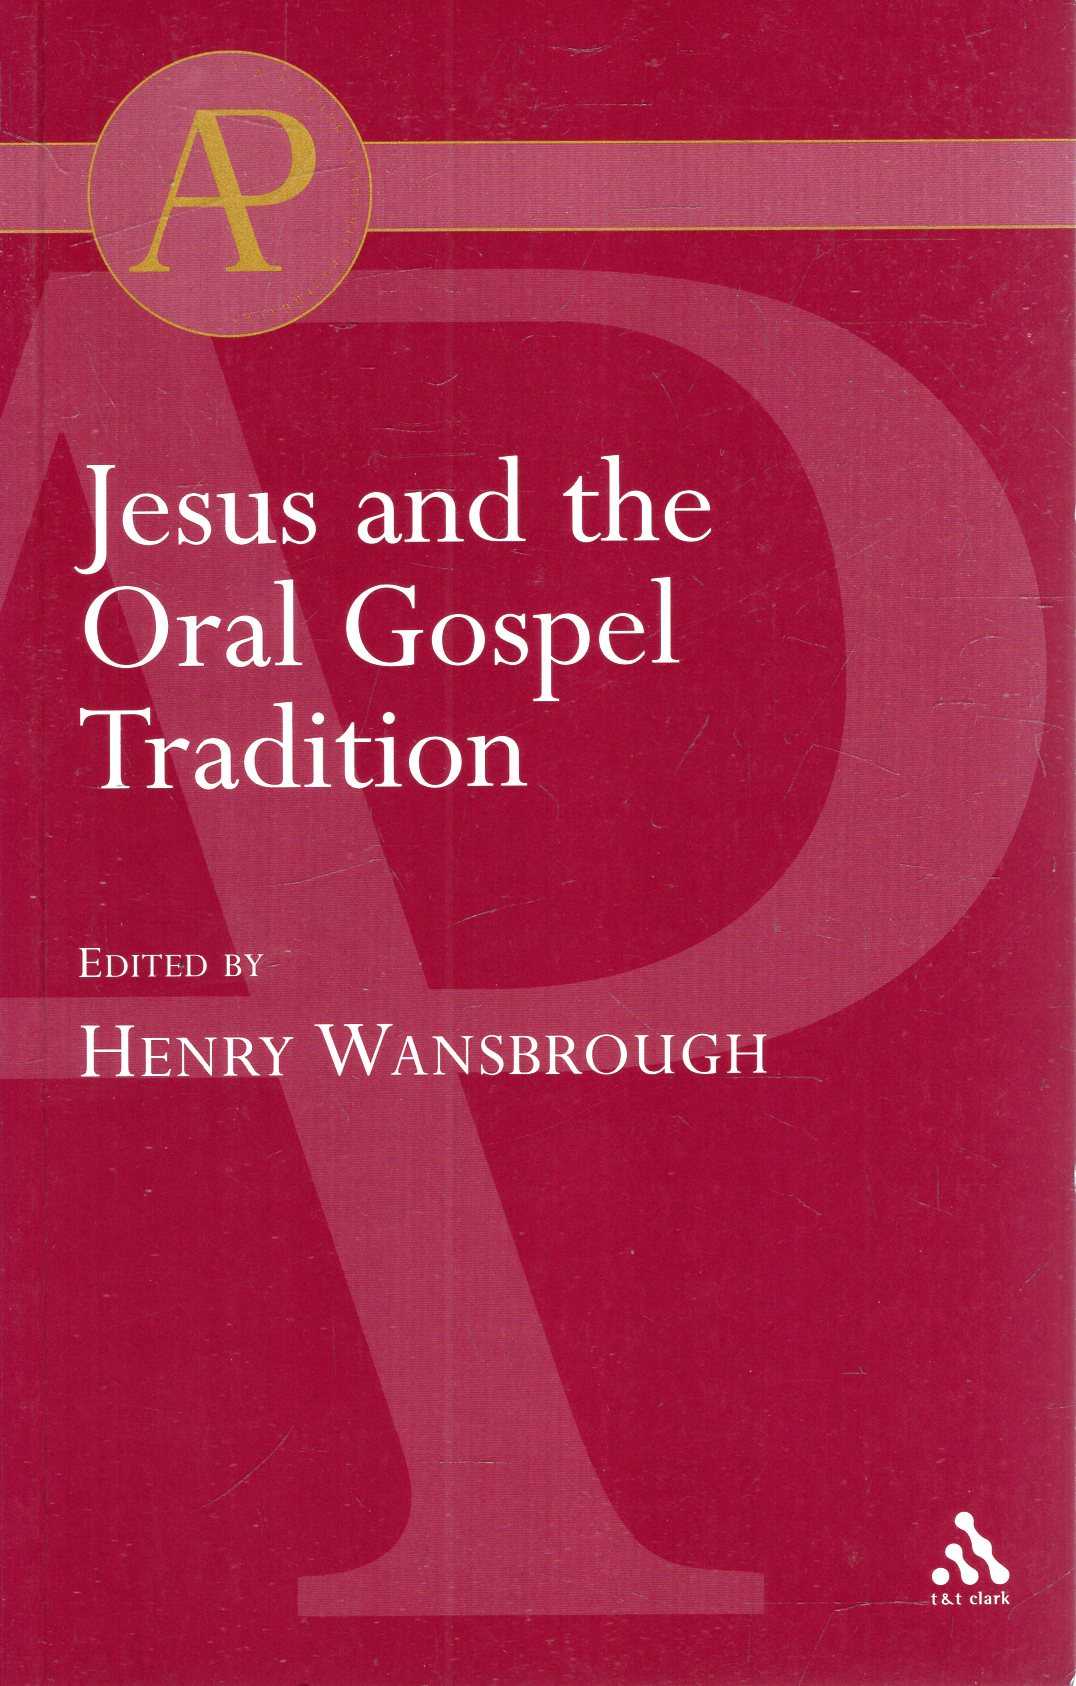 Jesus and the Oral Gospel Tradition - Wansborough, Henry (editor)